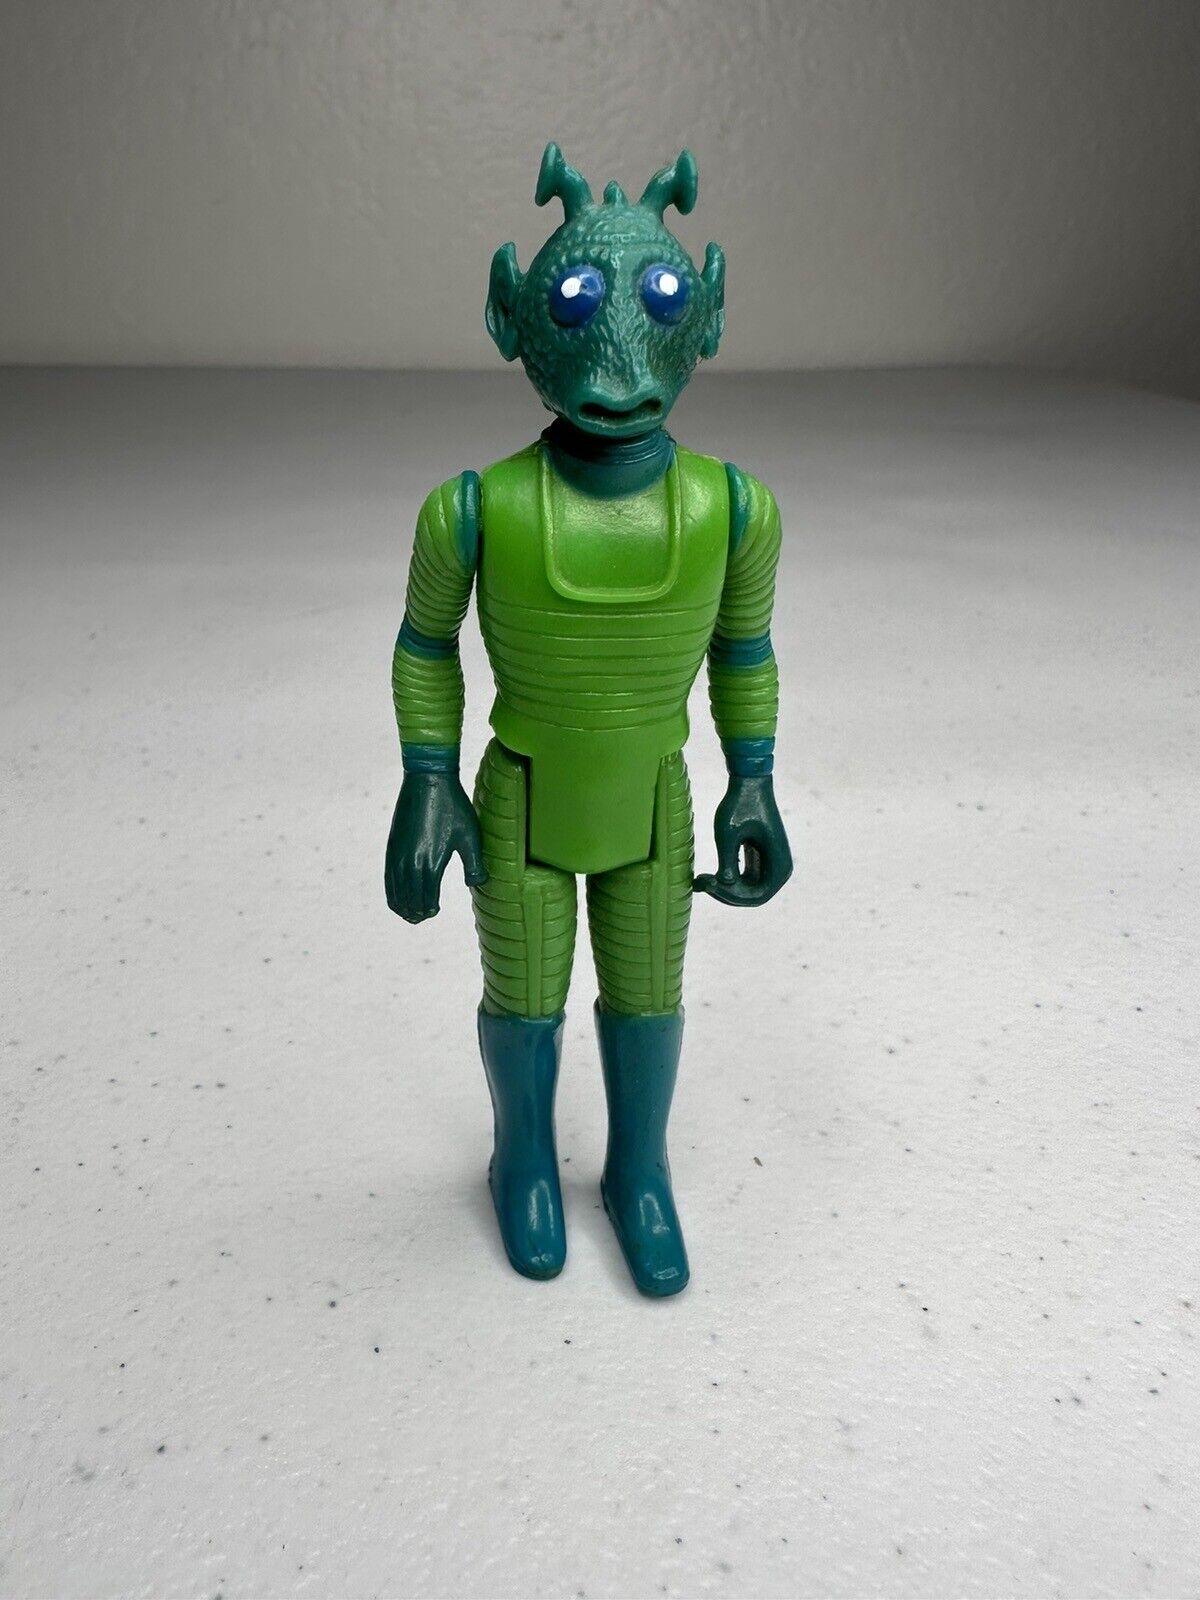 Vintage 1978 Kenner Star Wars Greedo Figure - Loose Cantina Alien in Good Condition - TreasuTiques